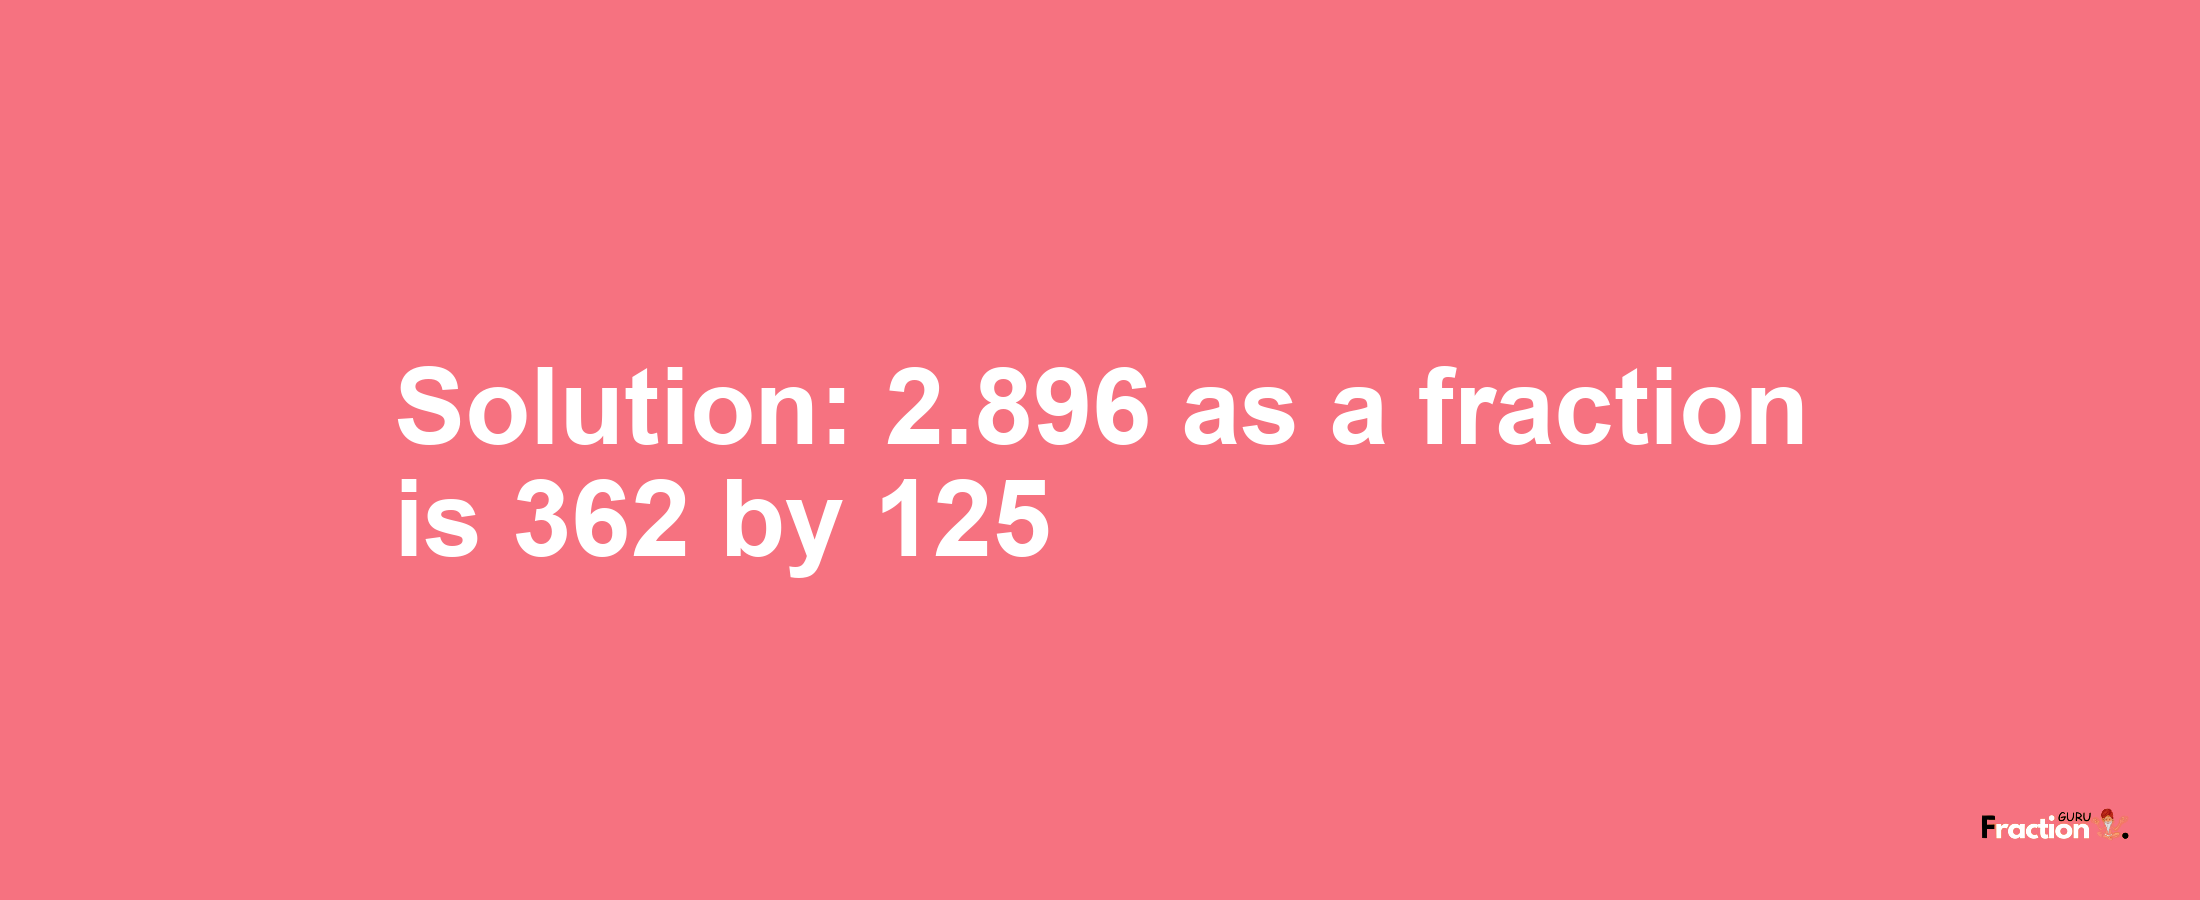 Solution:2.896 as a fraction is 362/125